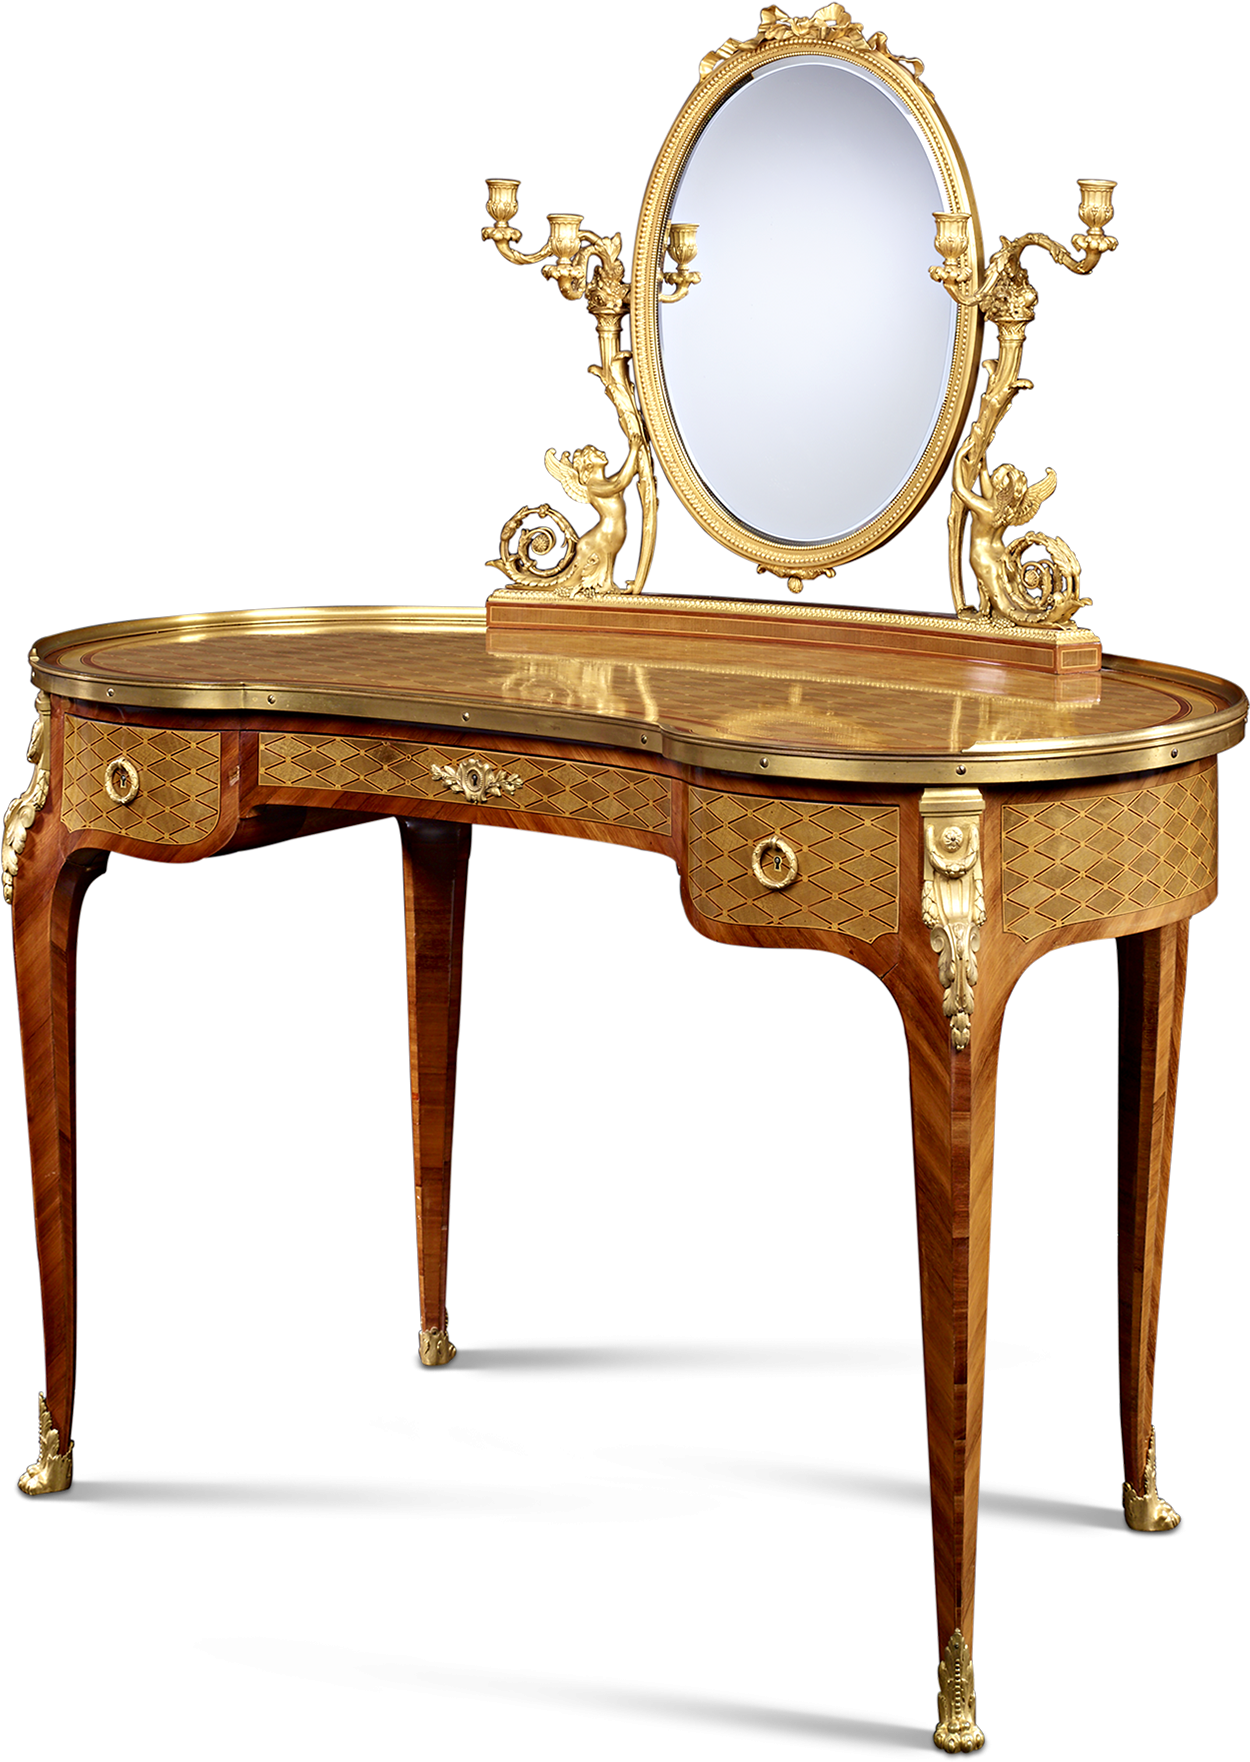 A Gold And Wood Vanity With A Mirror